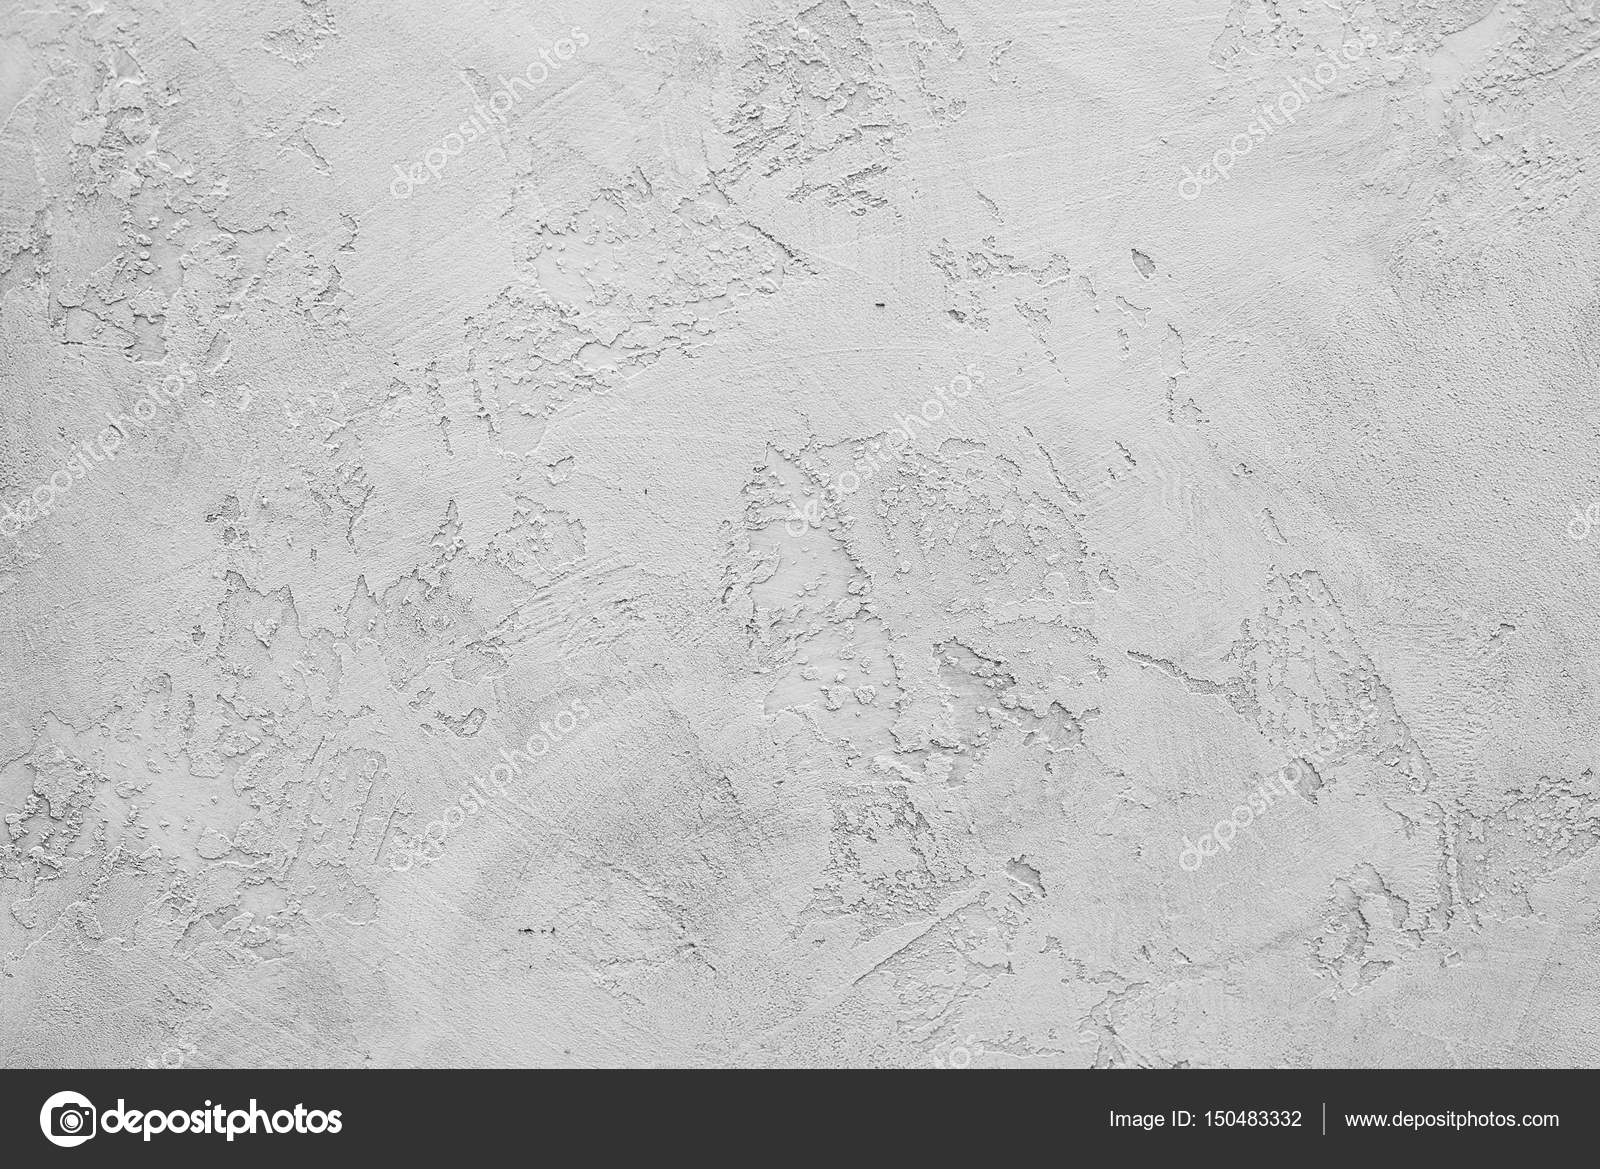 Wall putty Stock Photos, Royalty Free Wall putty Images